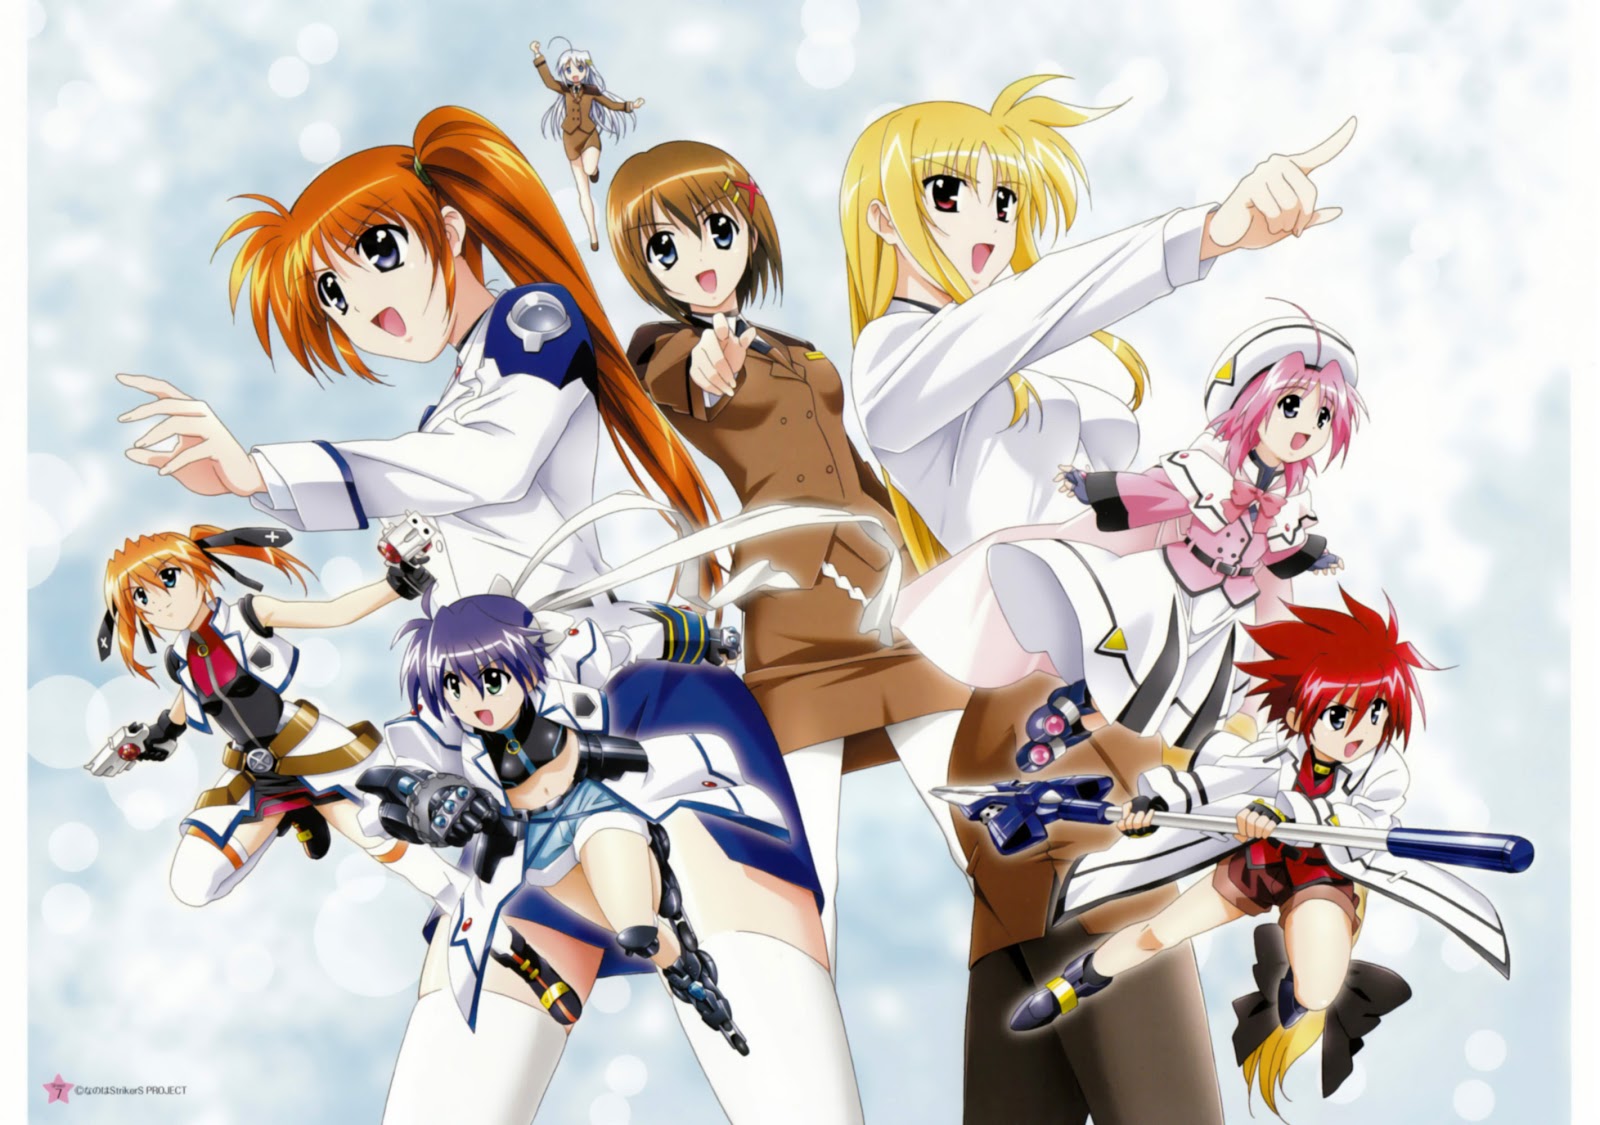 Magical Girl Lyrical Nanoha Strikers Backgrounds, Compatible - PC, Mobile, Gadgets| 1600x1125 px